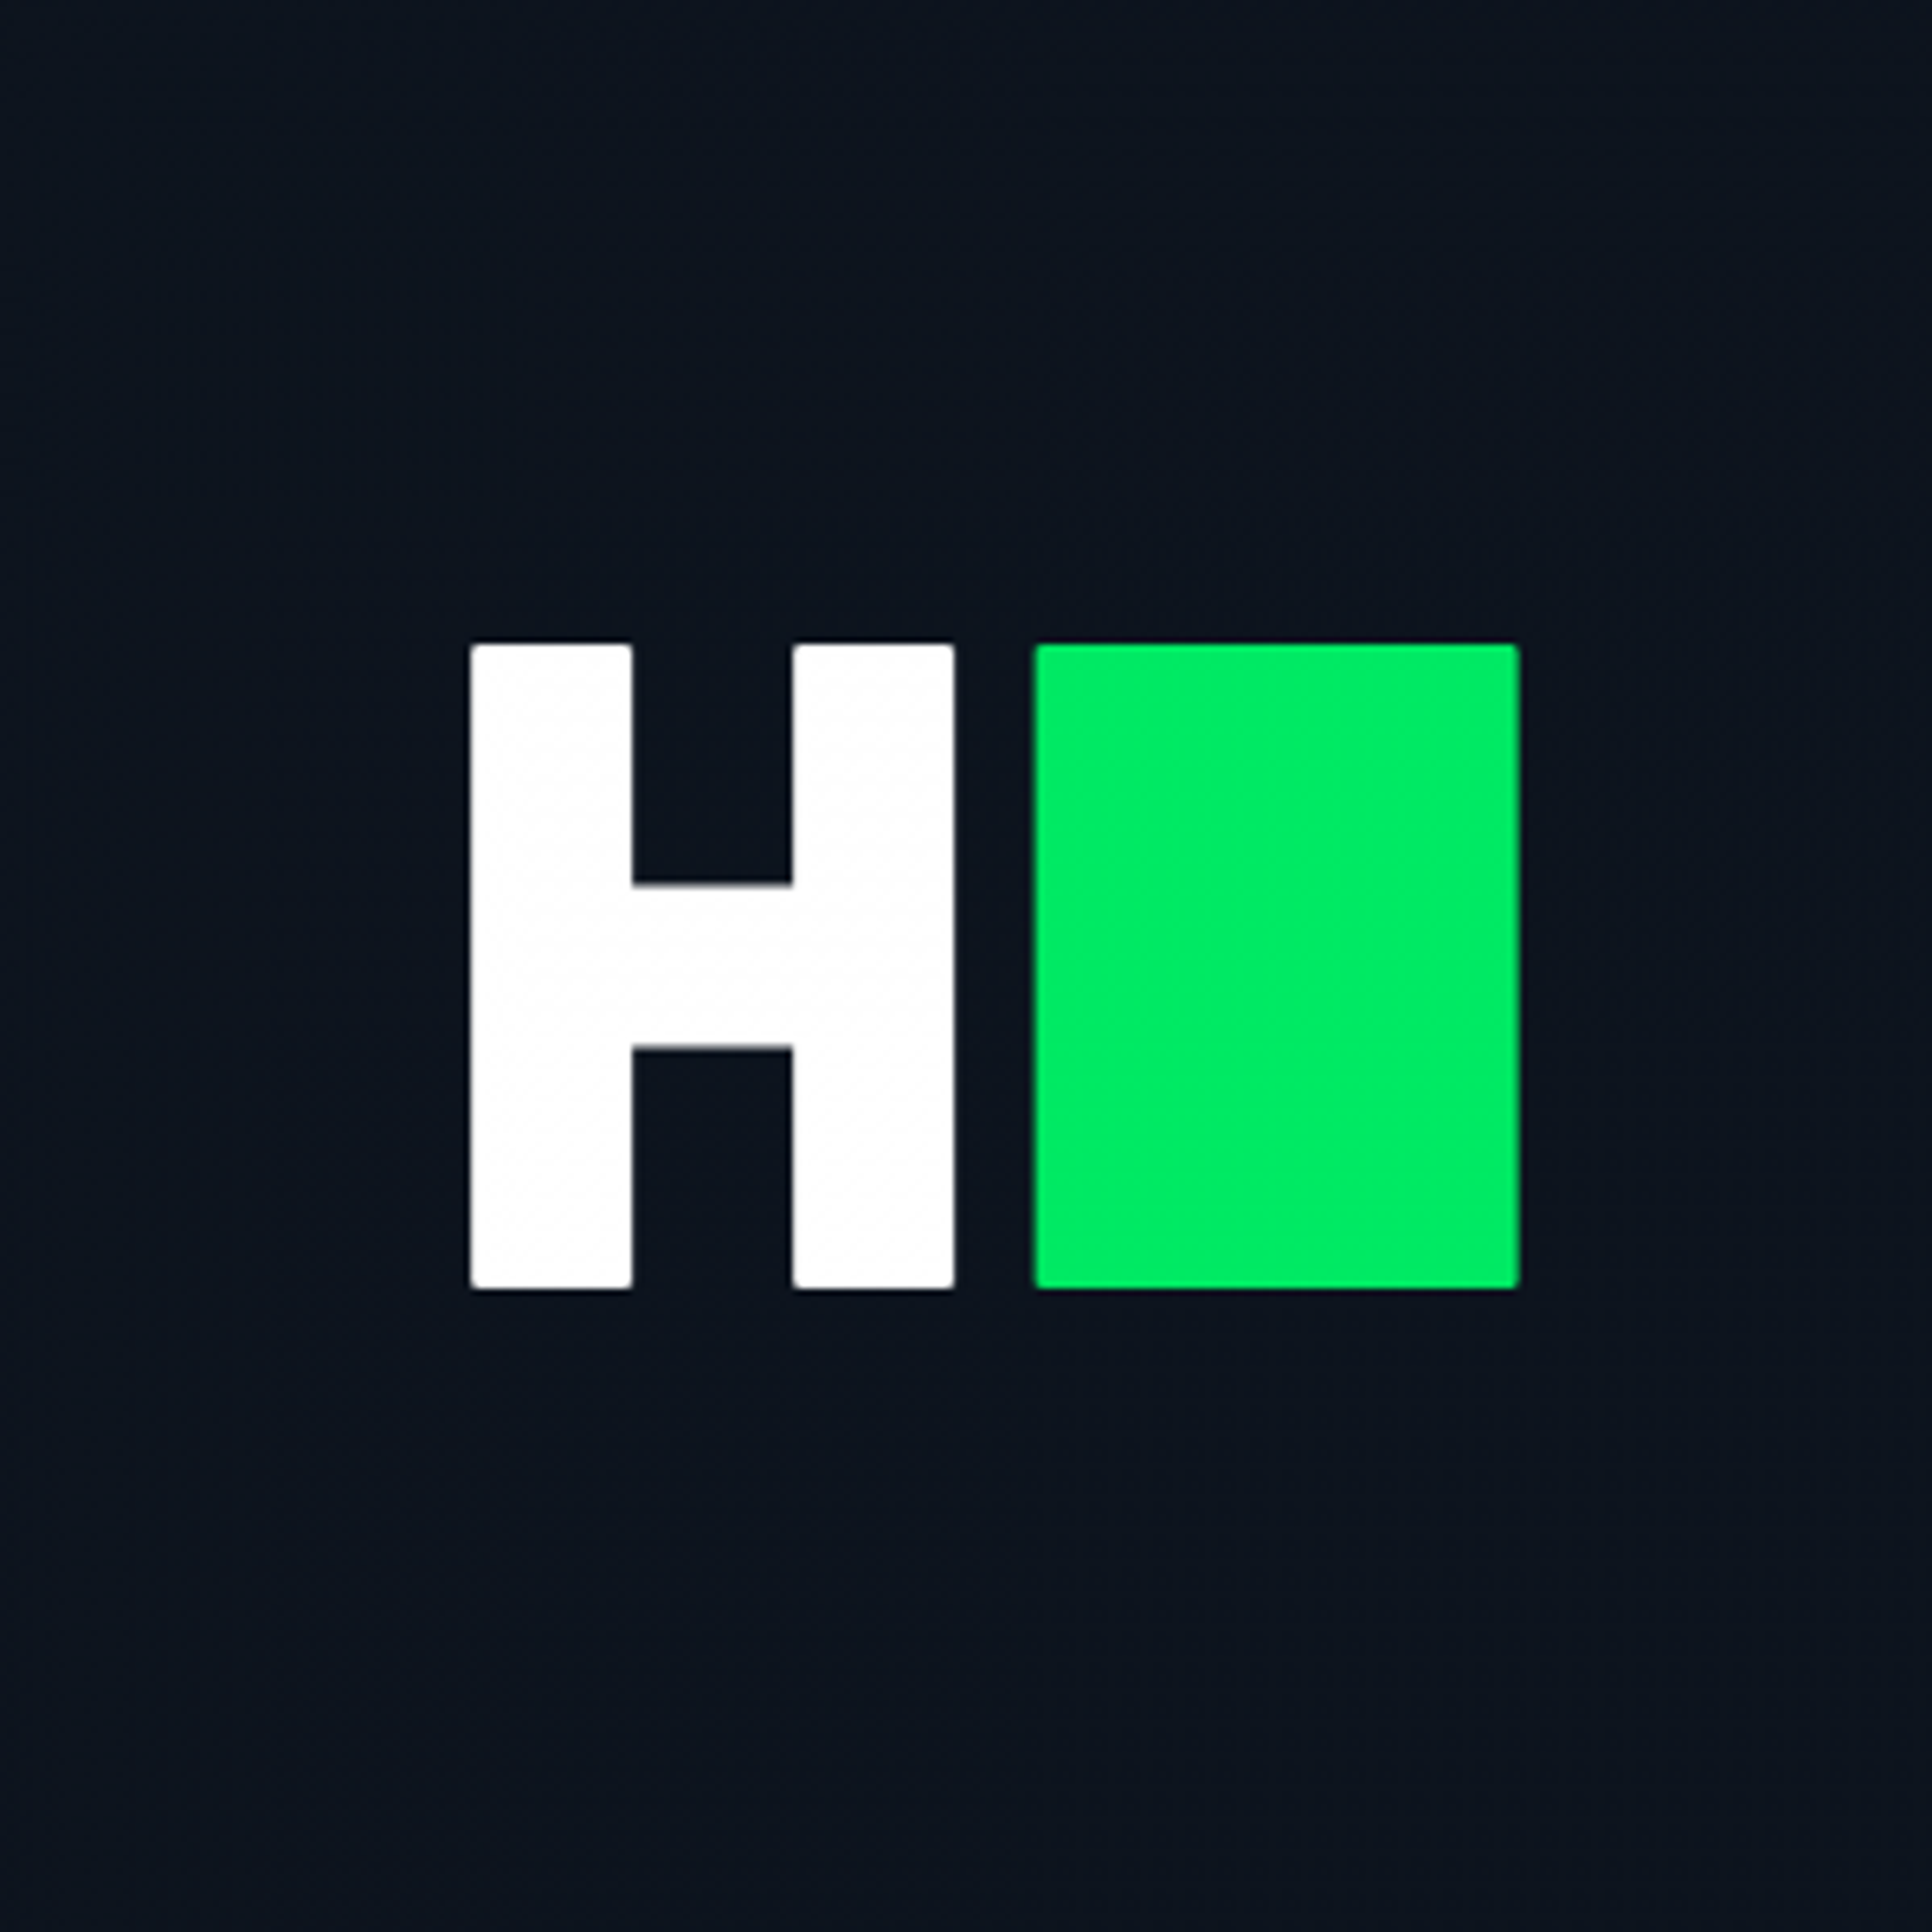 HackerRank - Online Coding Tests and Technical Interviews